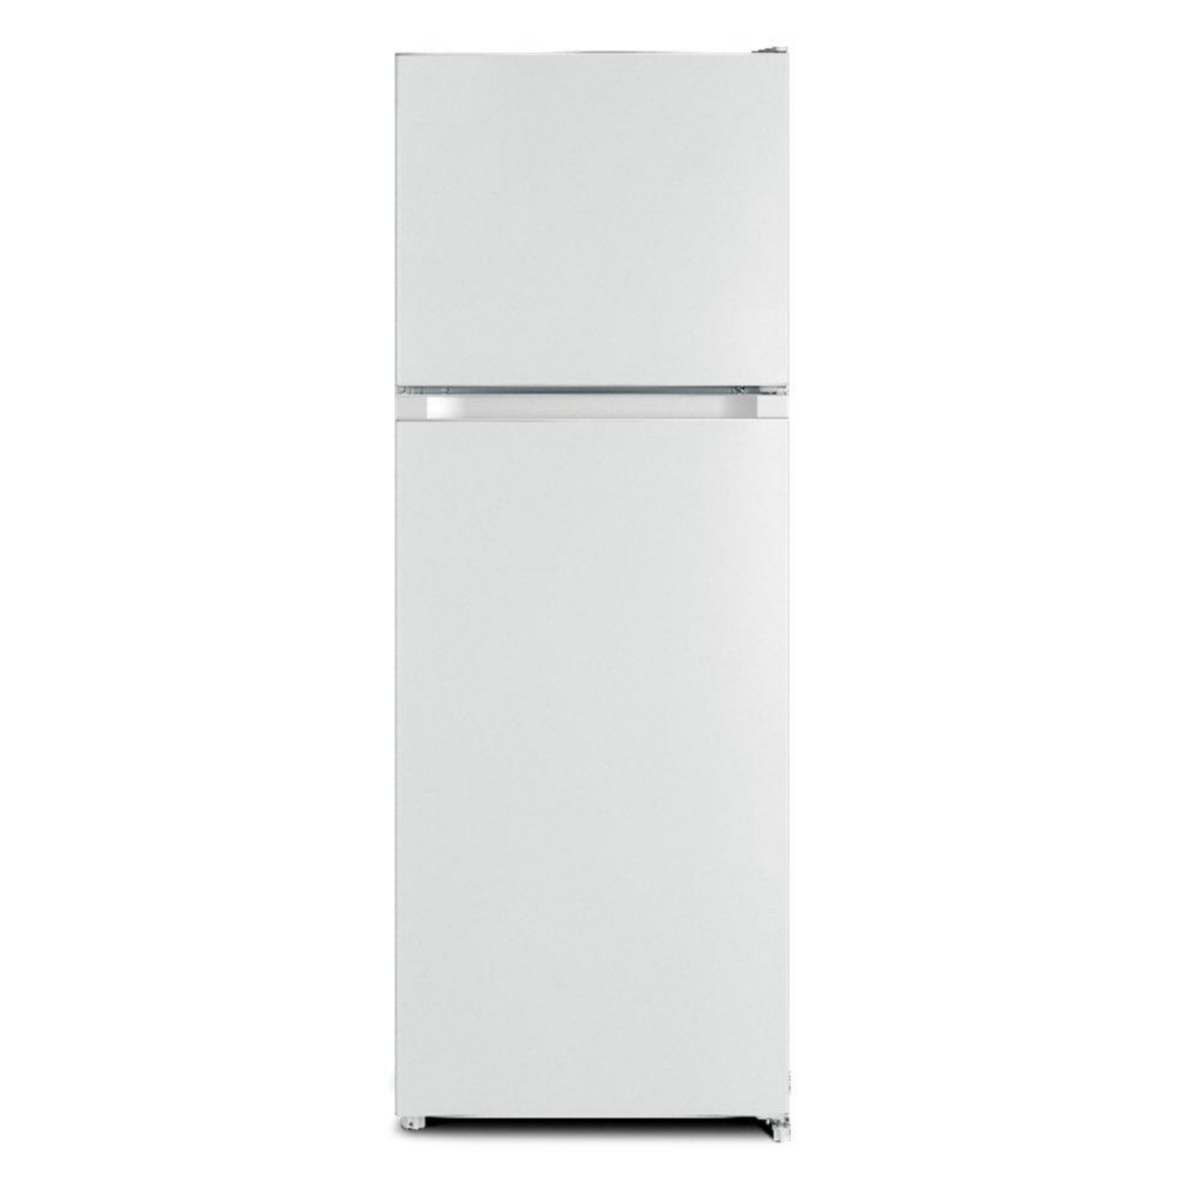 Haier 13.7 CFT Double Door Refrigerator, 387 L, White, HRF-387WH